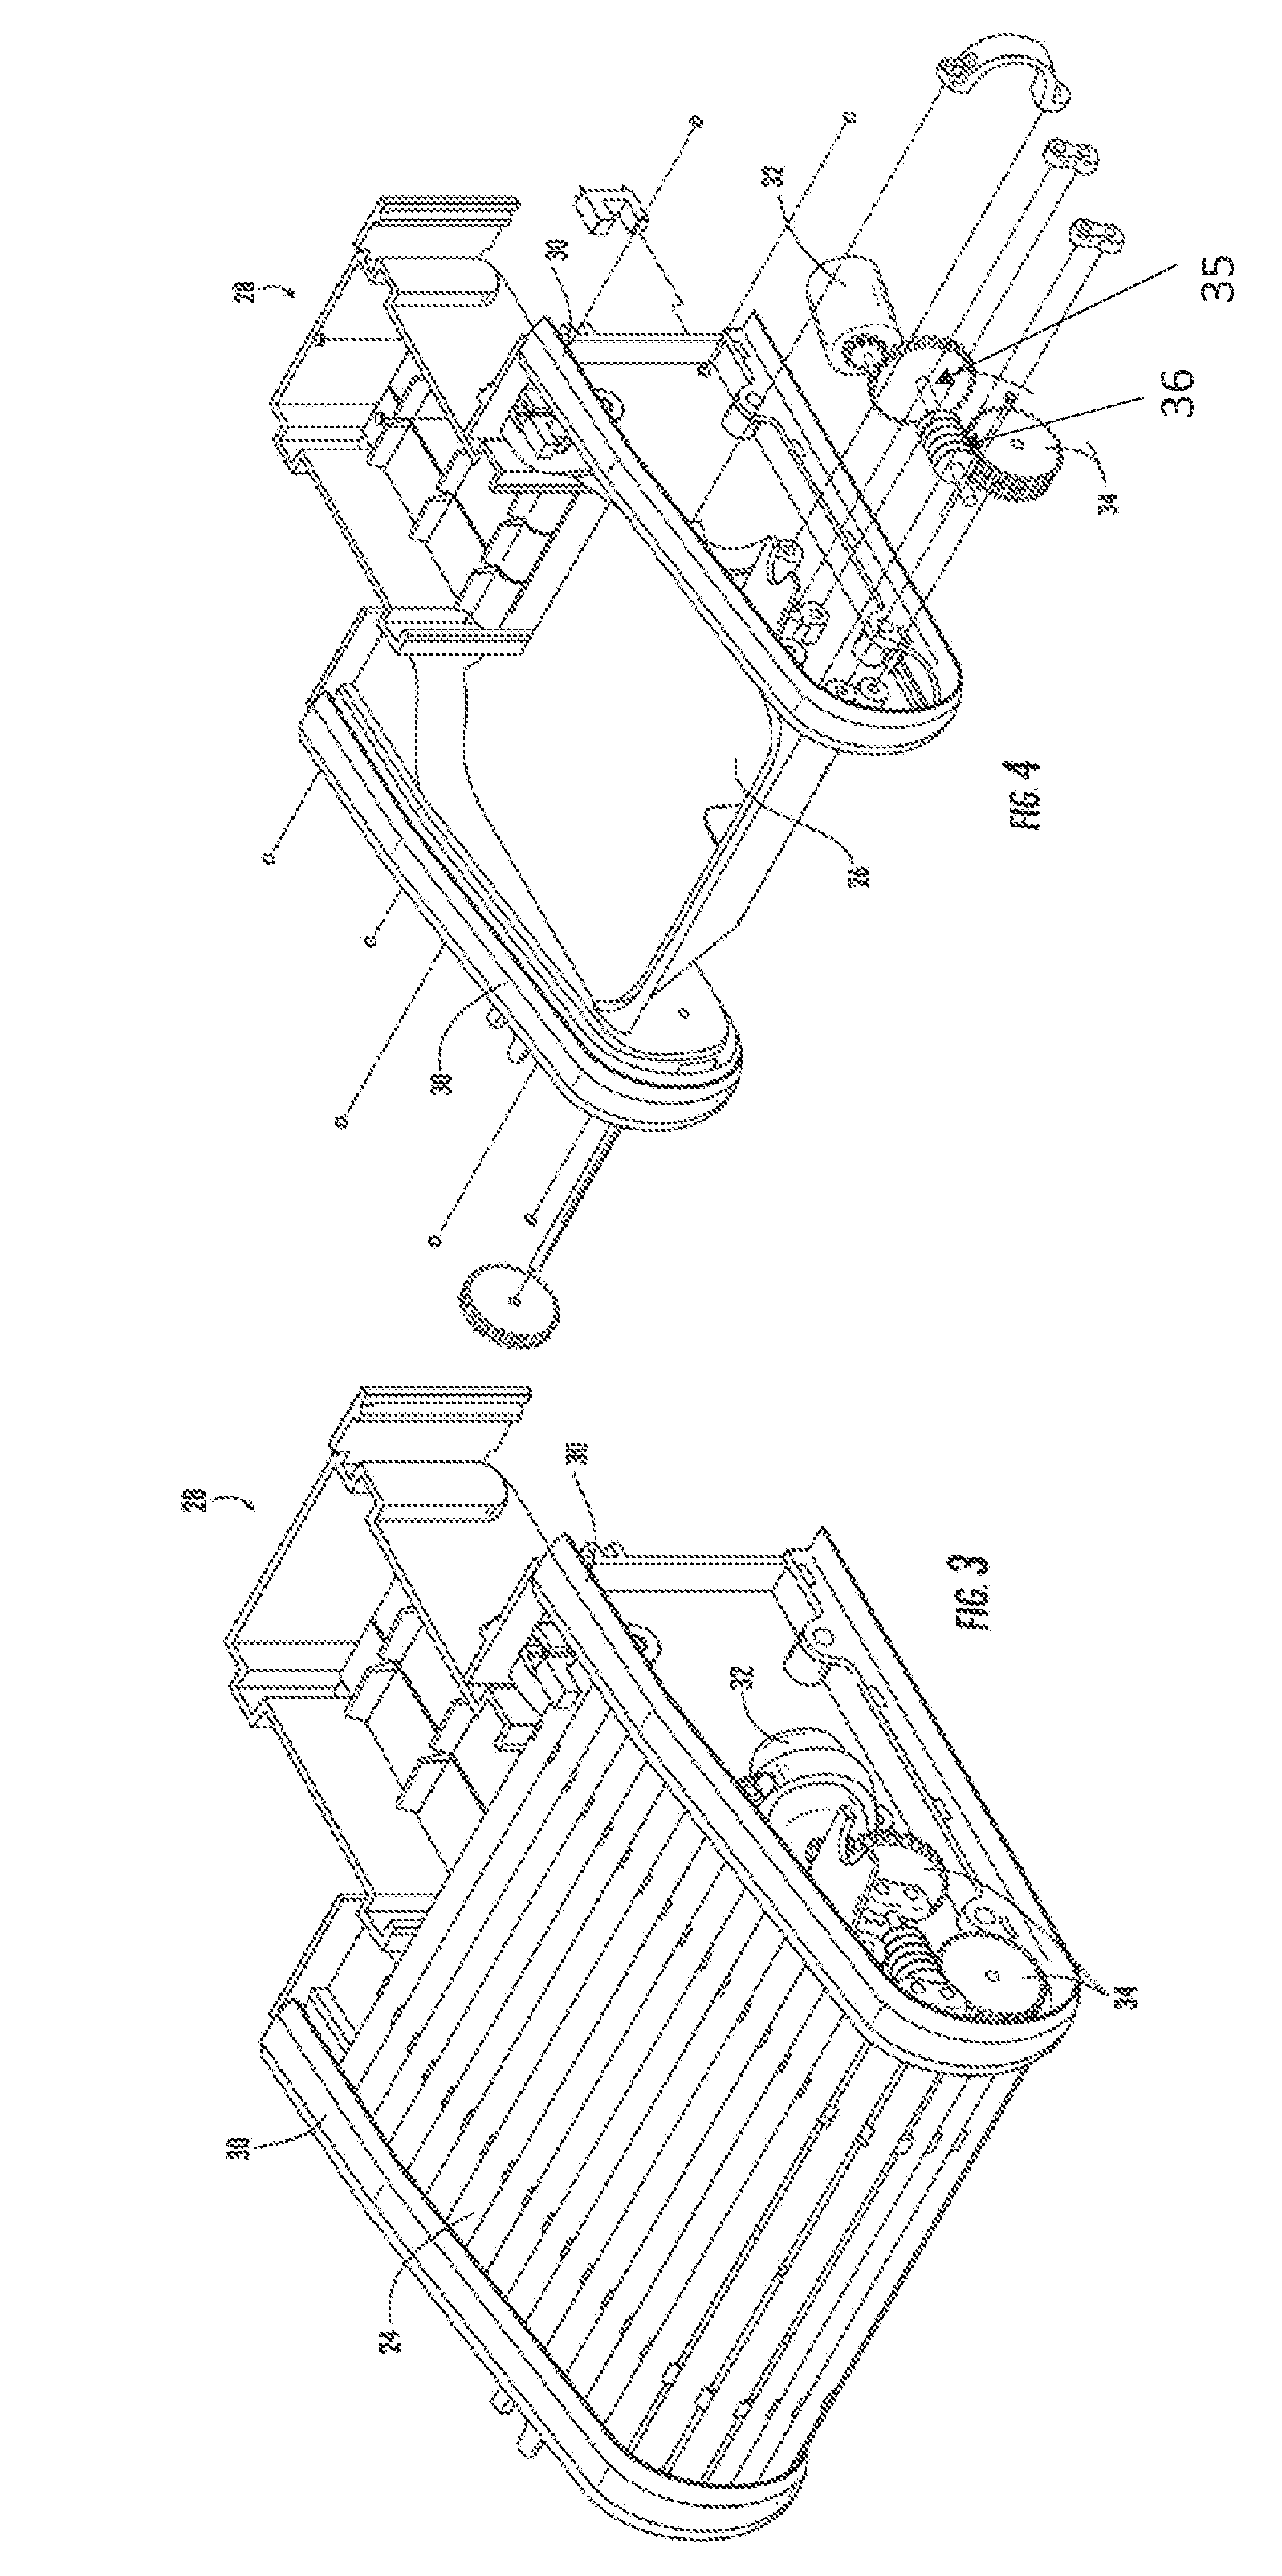 Method and system for providing preidentified pets selective access to a predetermined location or object